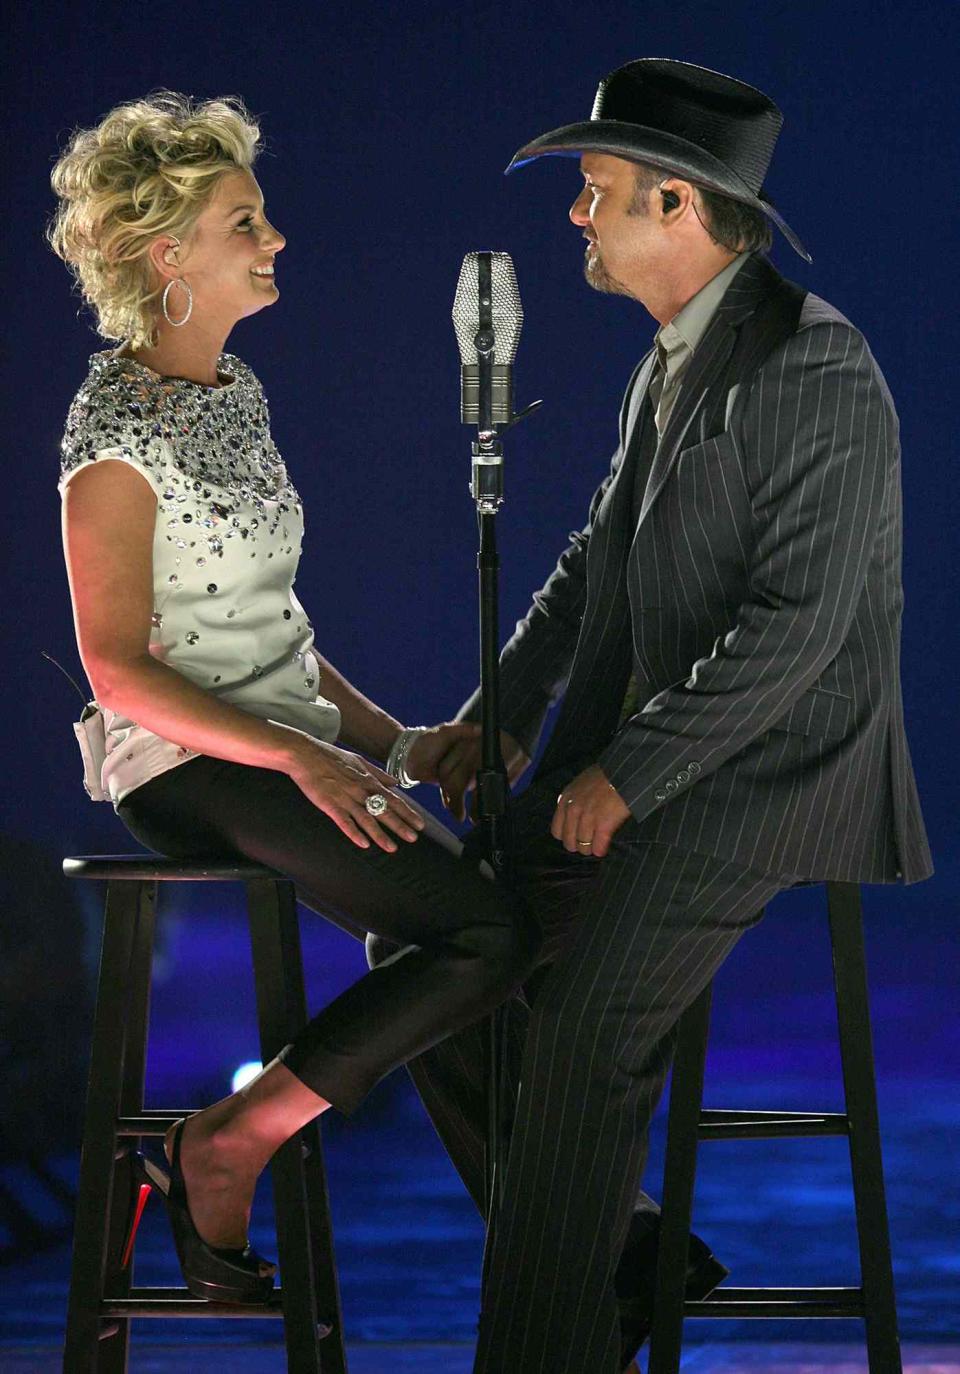 Faith Hill and Tim McGraw onstage during the 2008 CMT Music Awards at the Curb Events Center at Belmont University on April 14, 2008 in Nashville, Tennessee